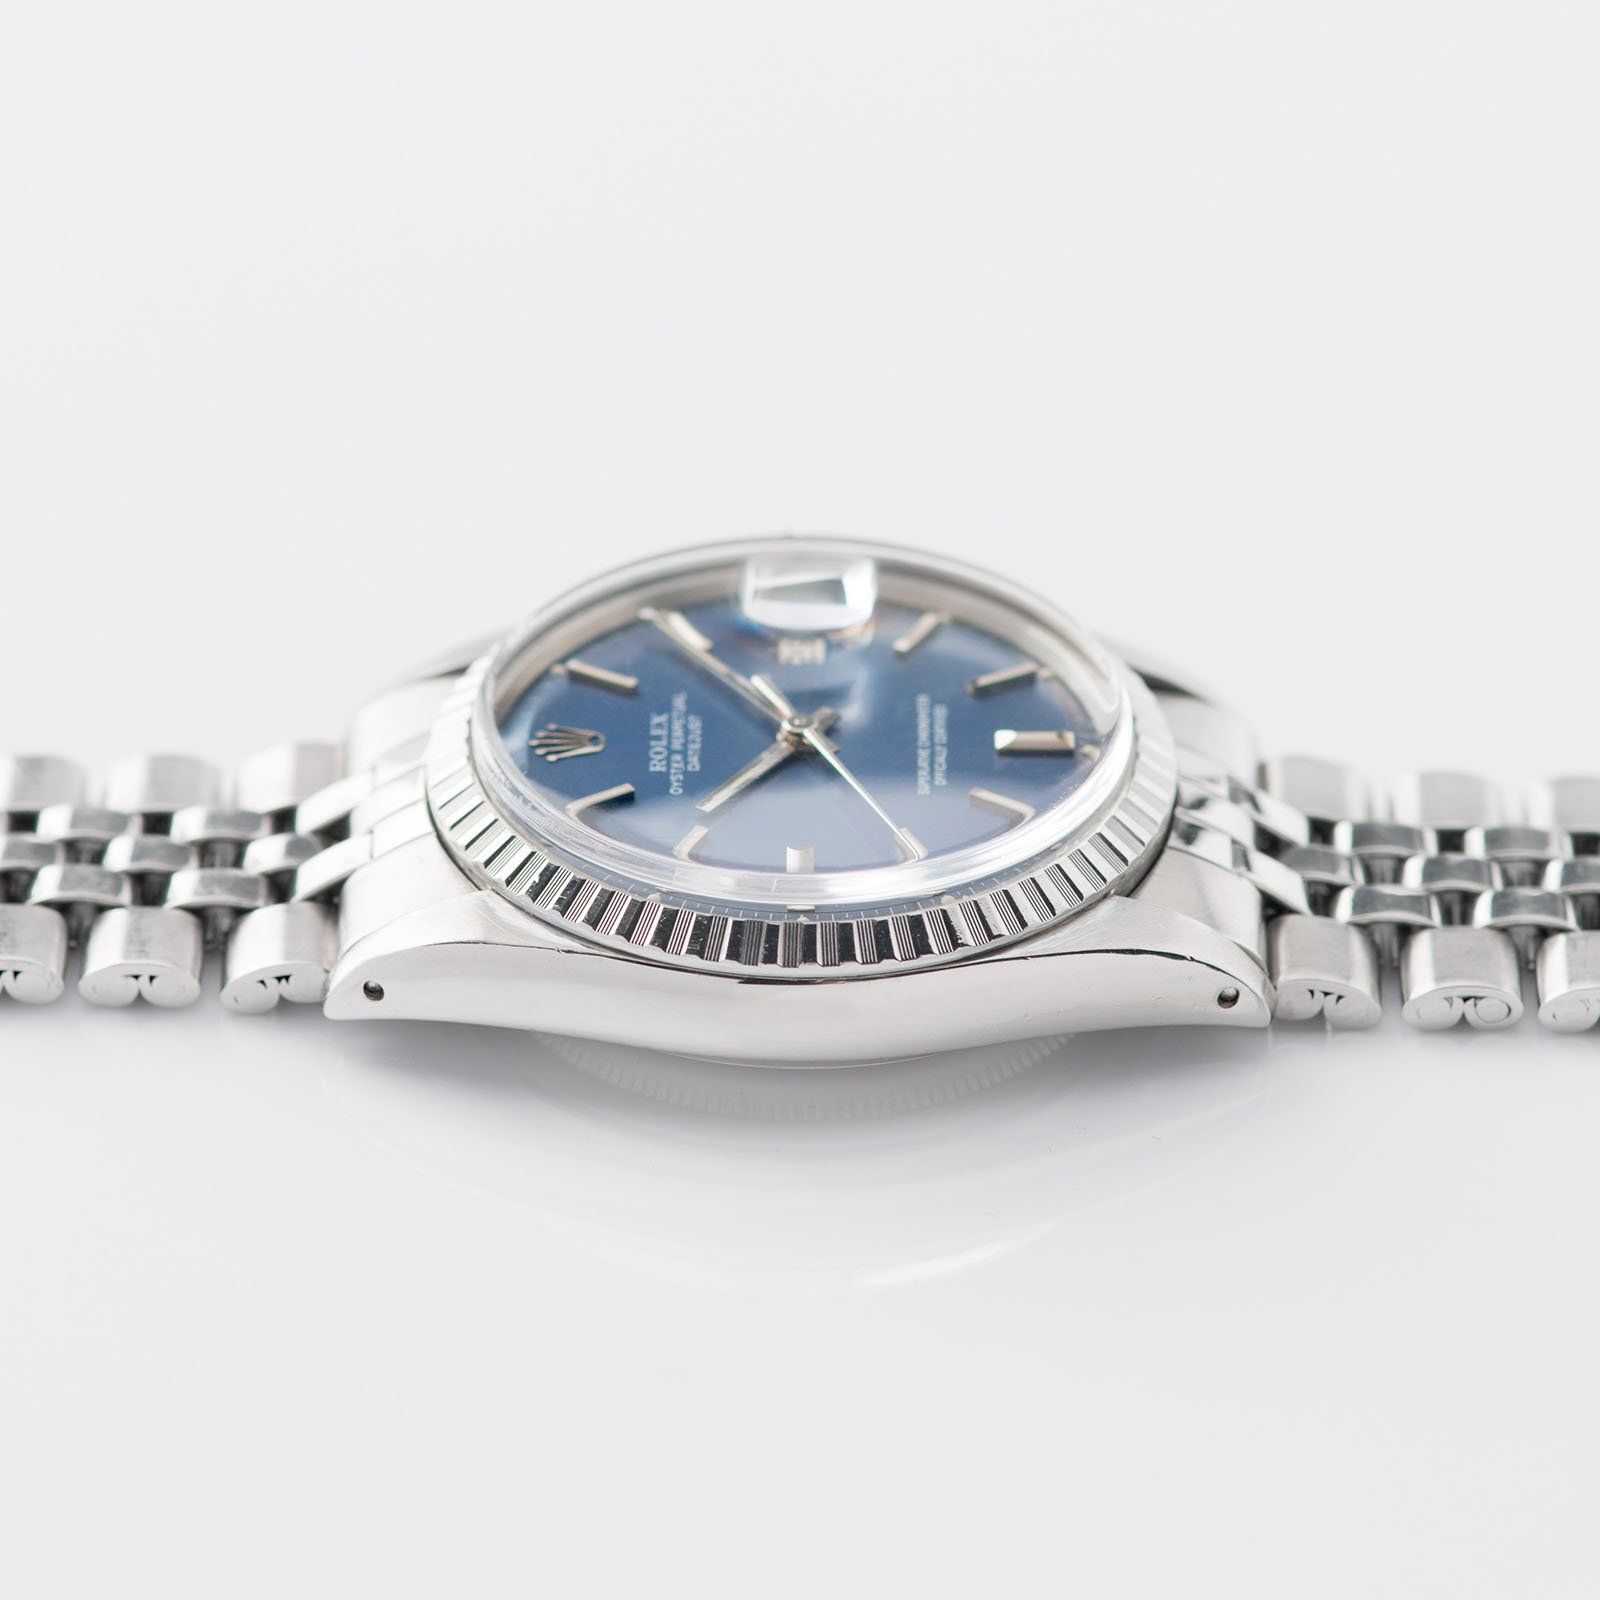 Rolex Datejust Blue Dial Reference 16030 